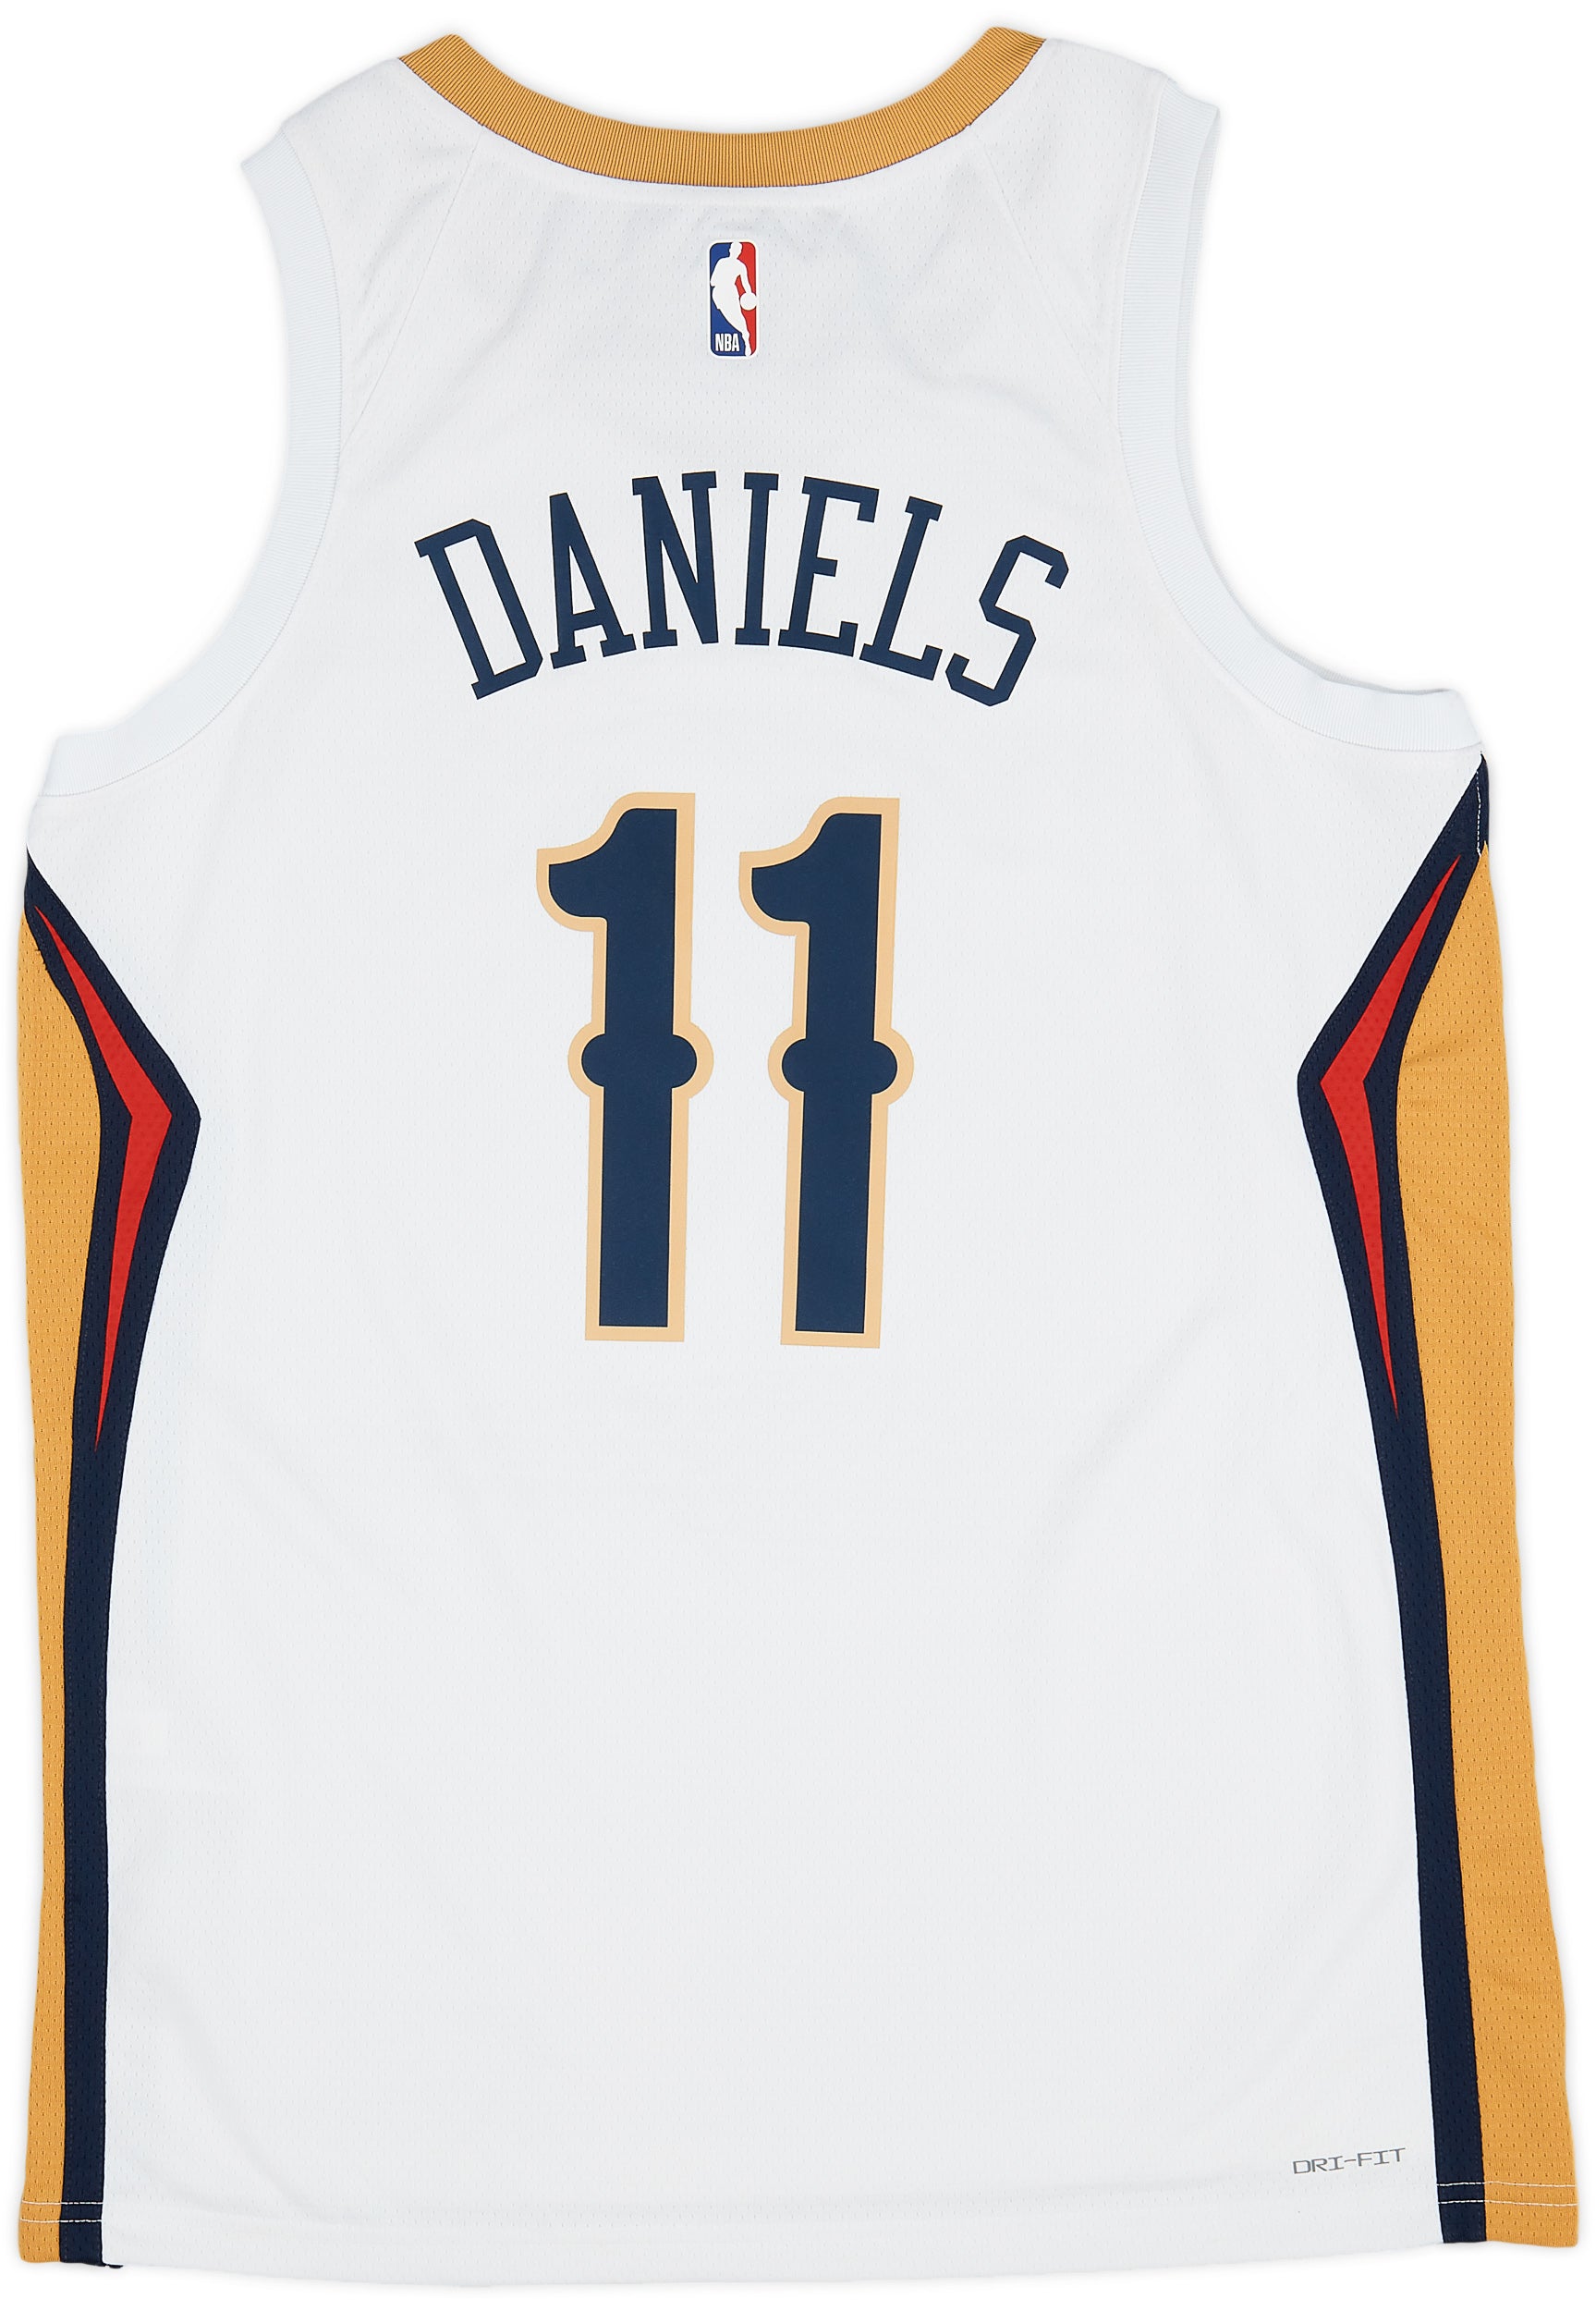 new orleans pelicans home jersey